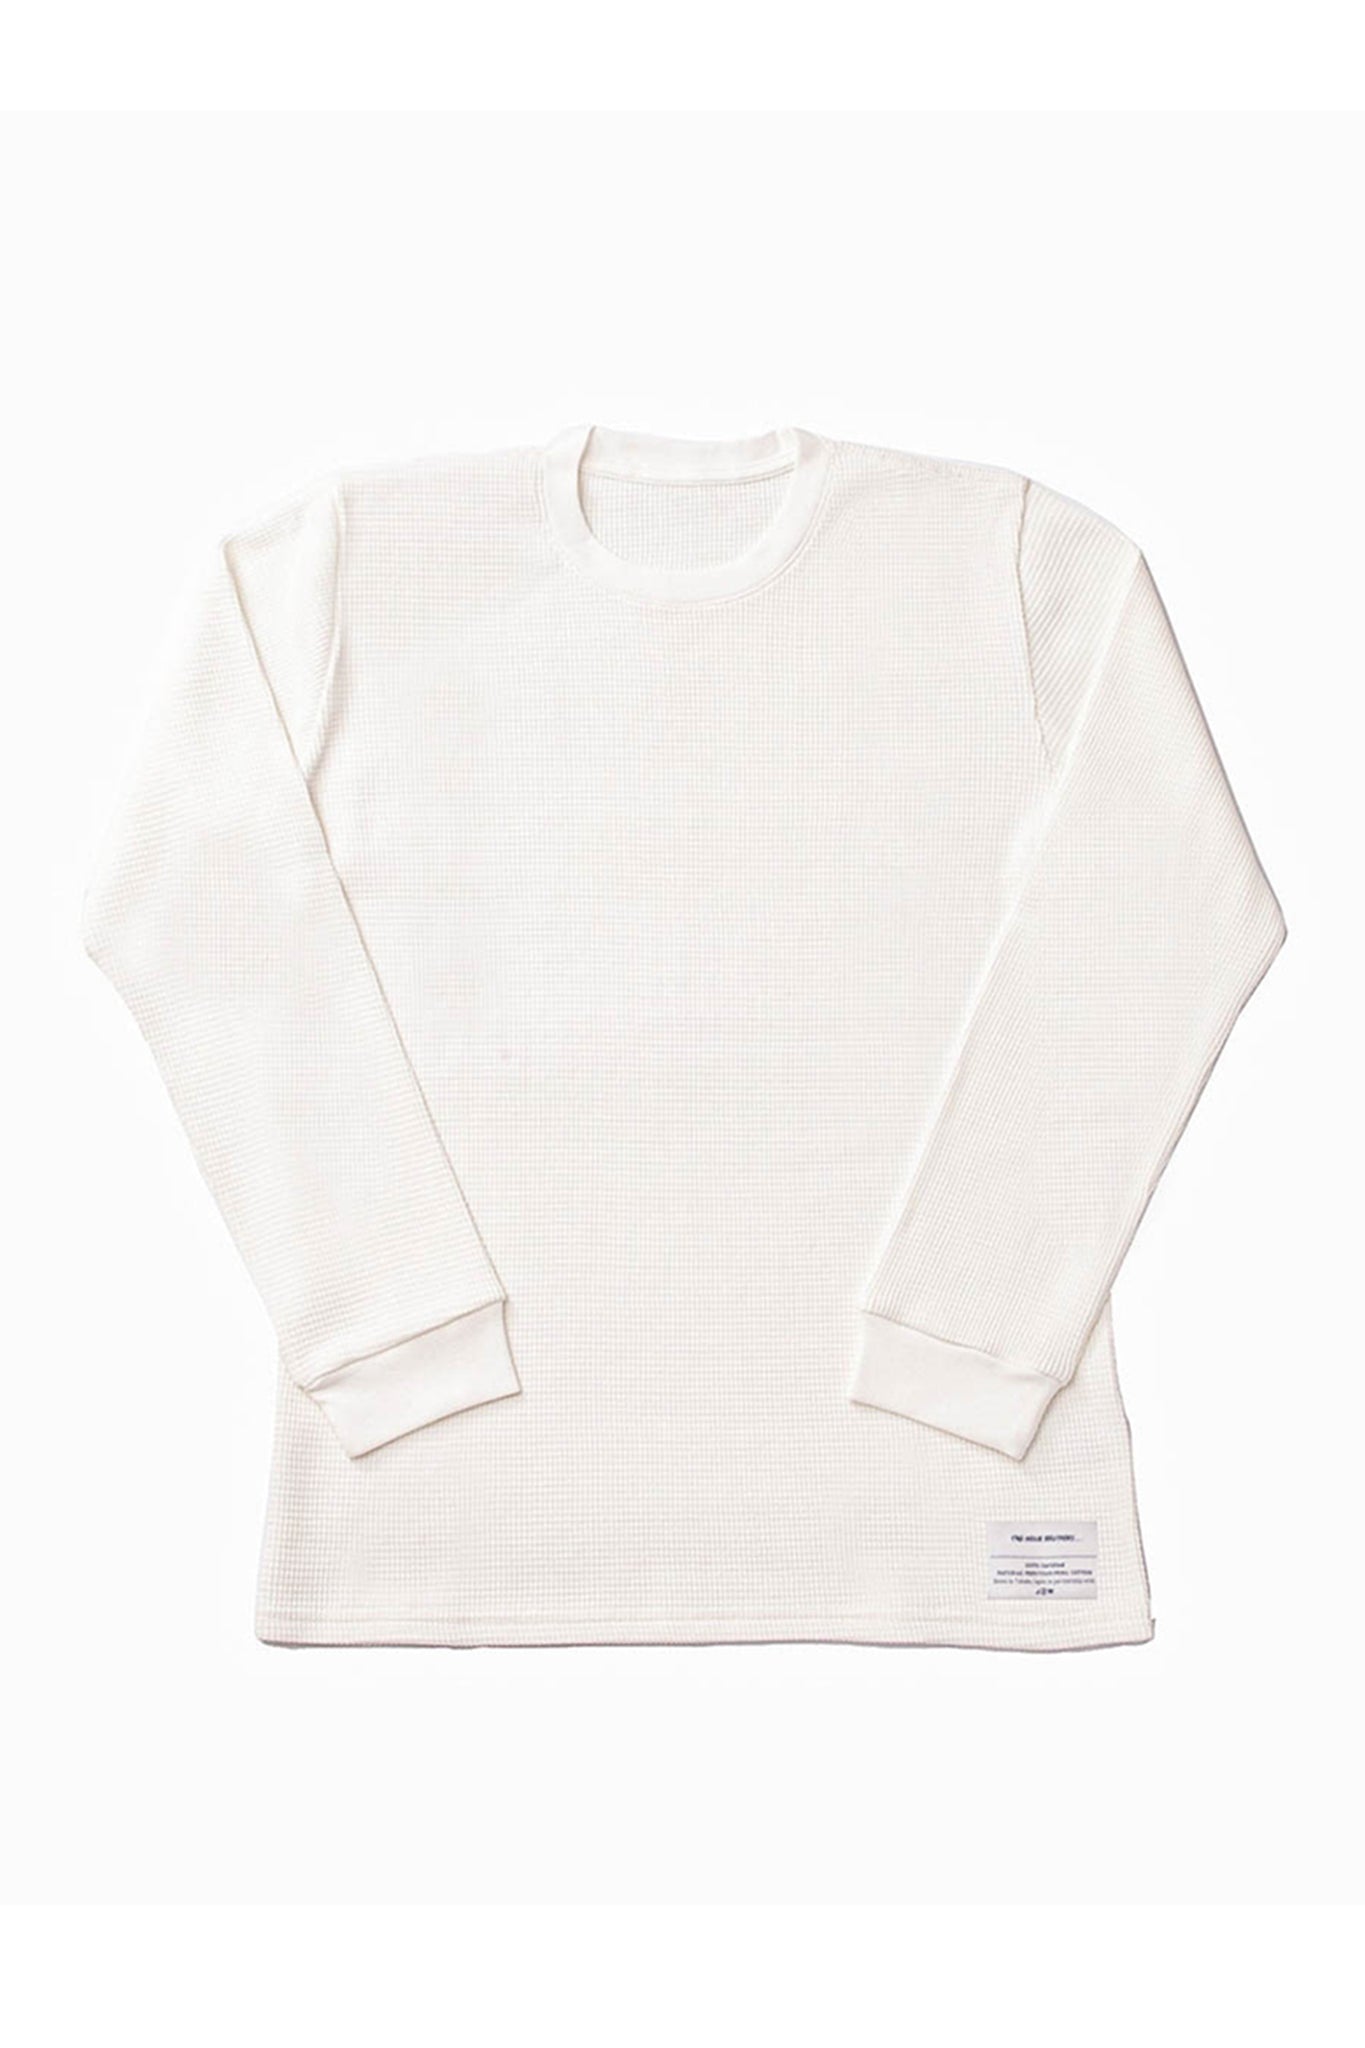 THE INOUE BROTHERS... "BASIC WAFFLE CREW NECK / NATURAL PIMA COTTON PROJECT"